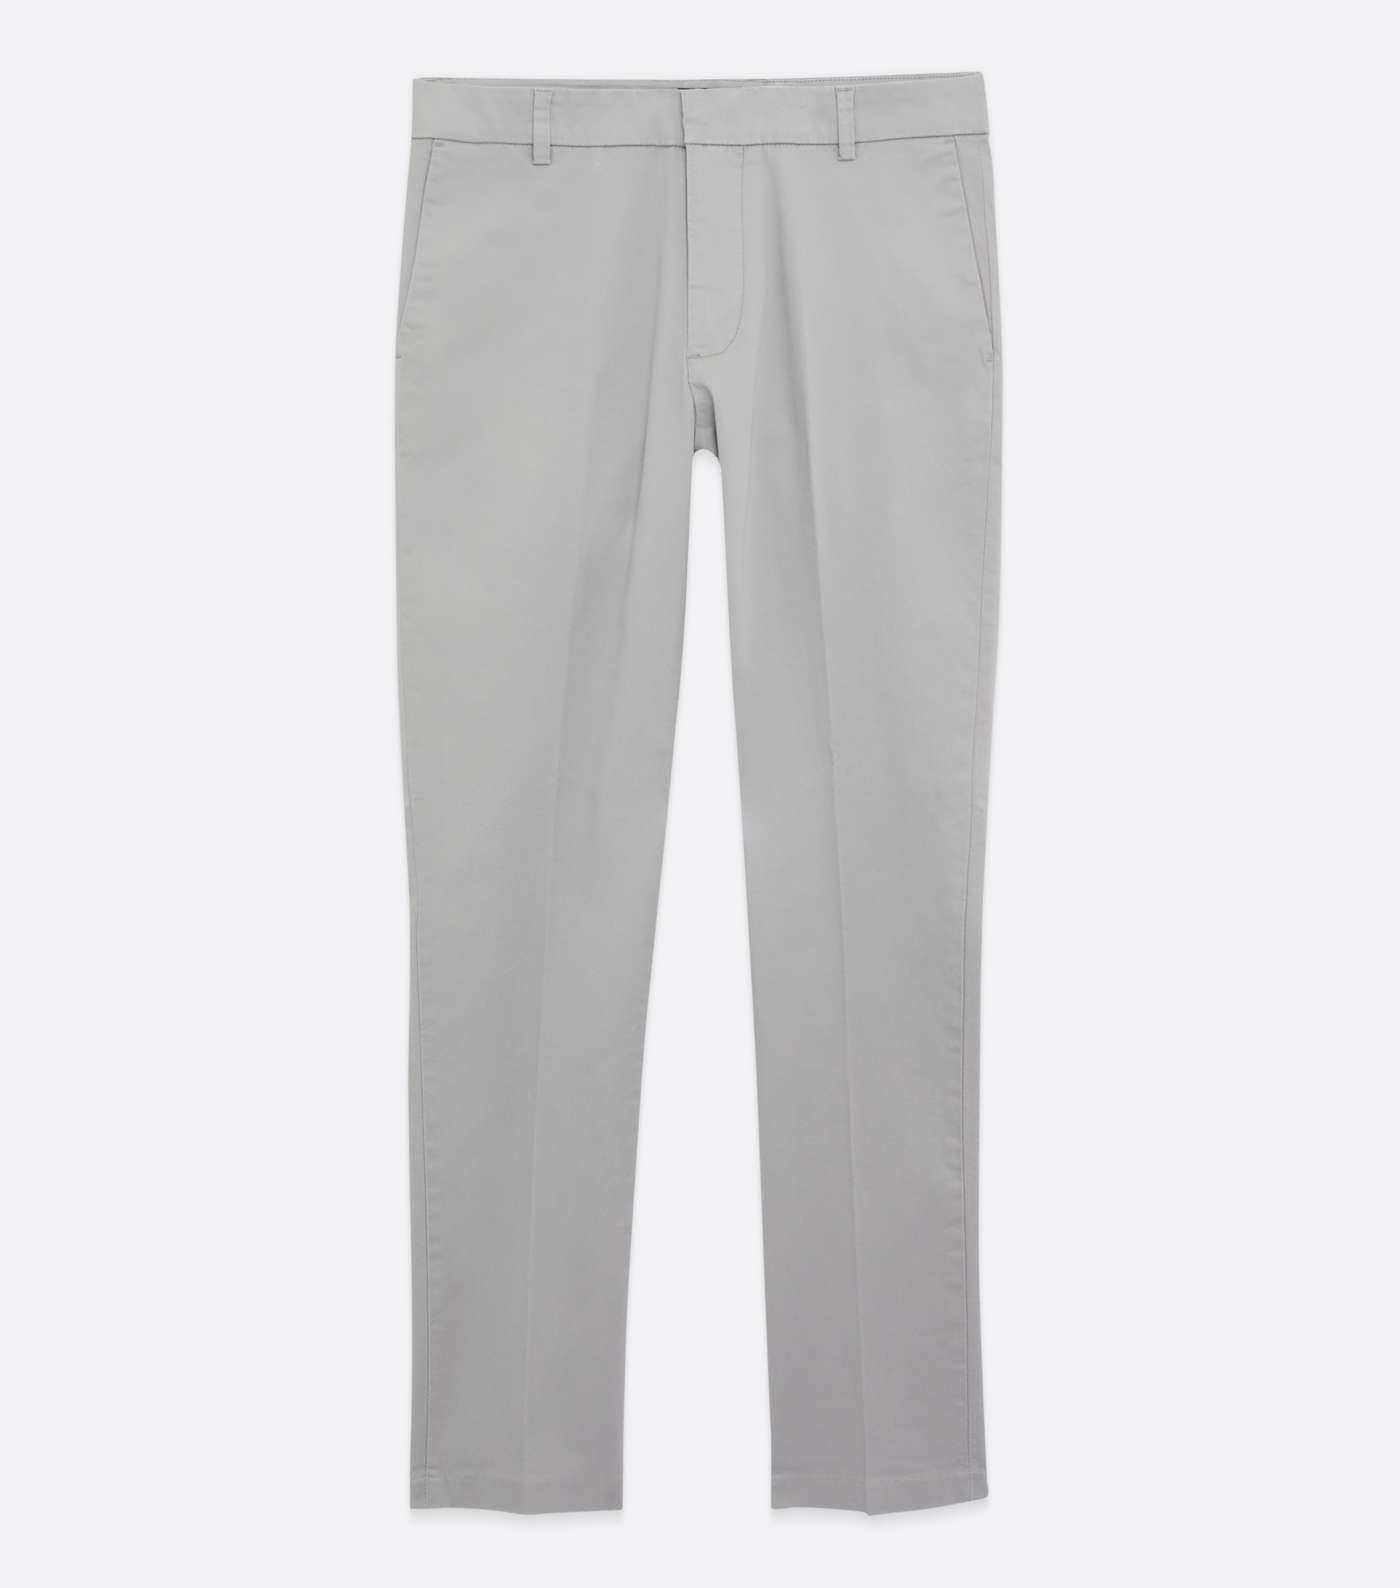 Pale Grey Tapered Skinny Fit Chinos Image 5